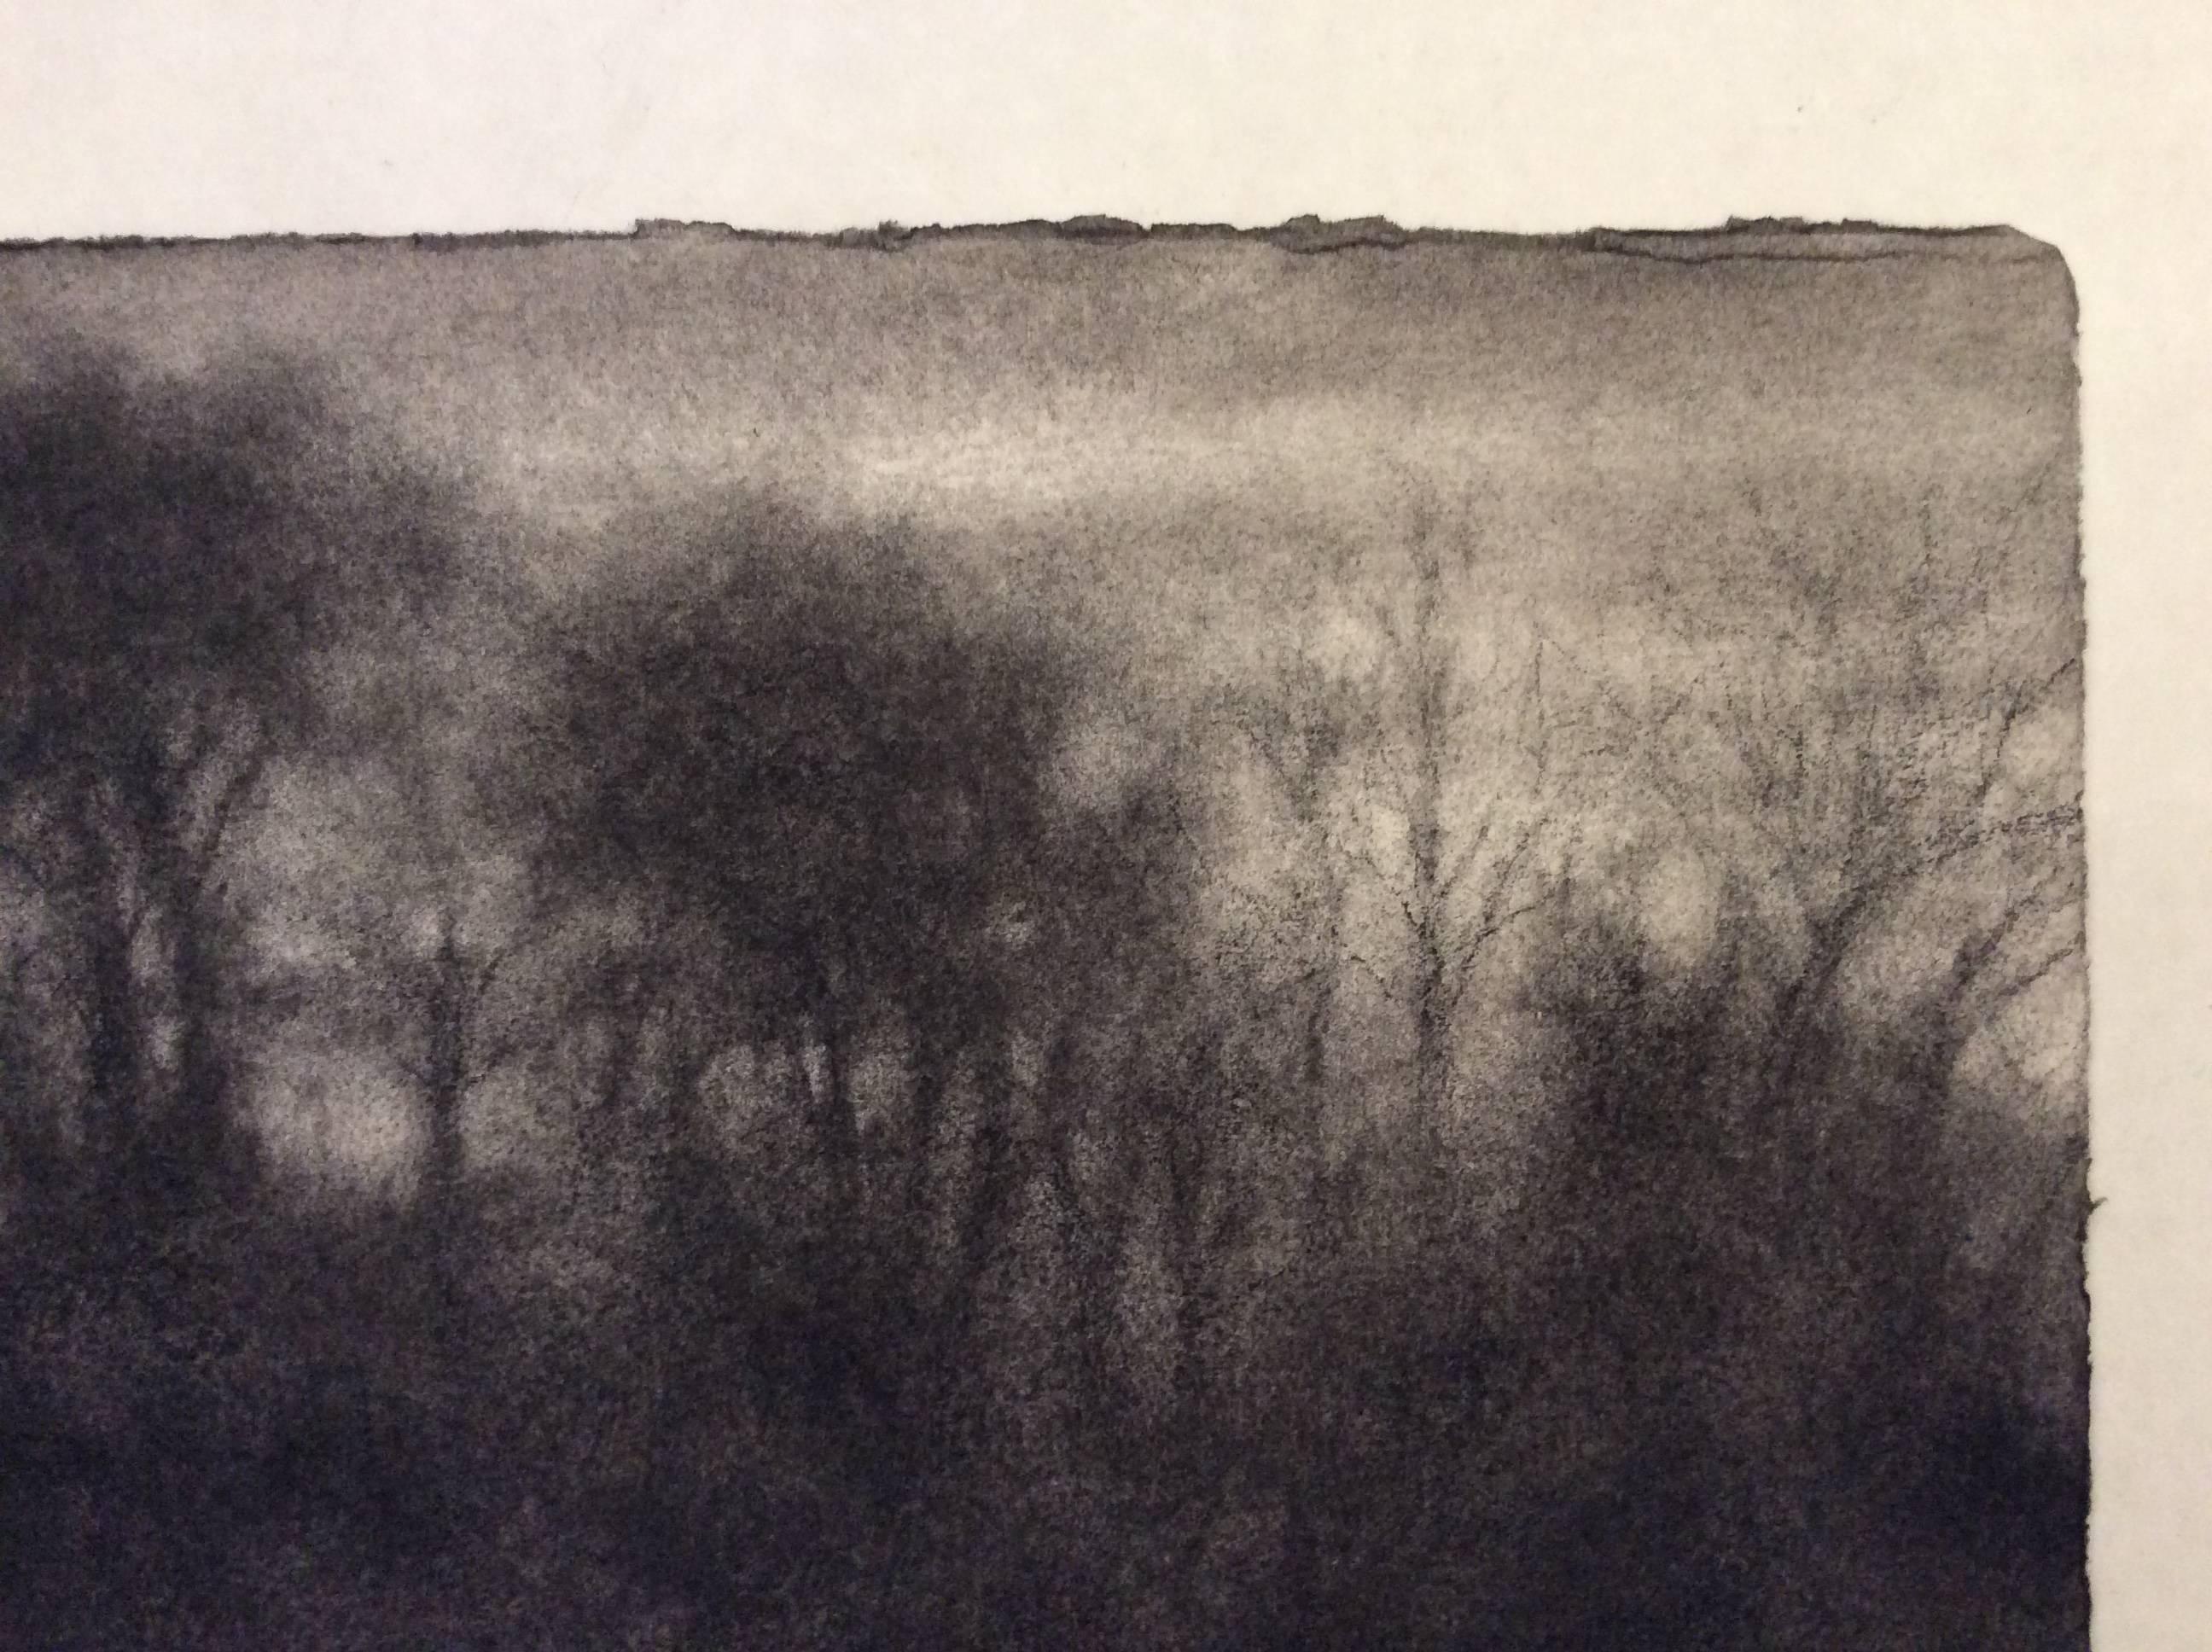 Winter View 1, Hudson: Black & White Charcoal and Green Pastel Drawing of Forest - Art by Sue Bryan